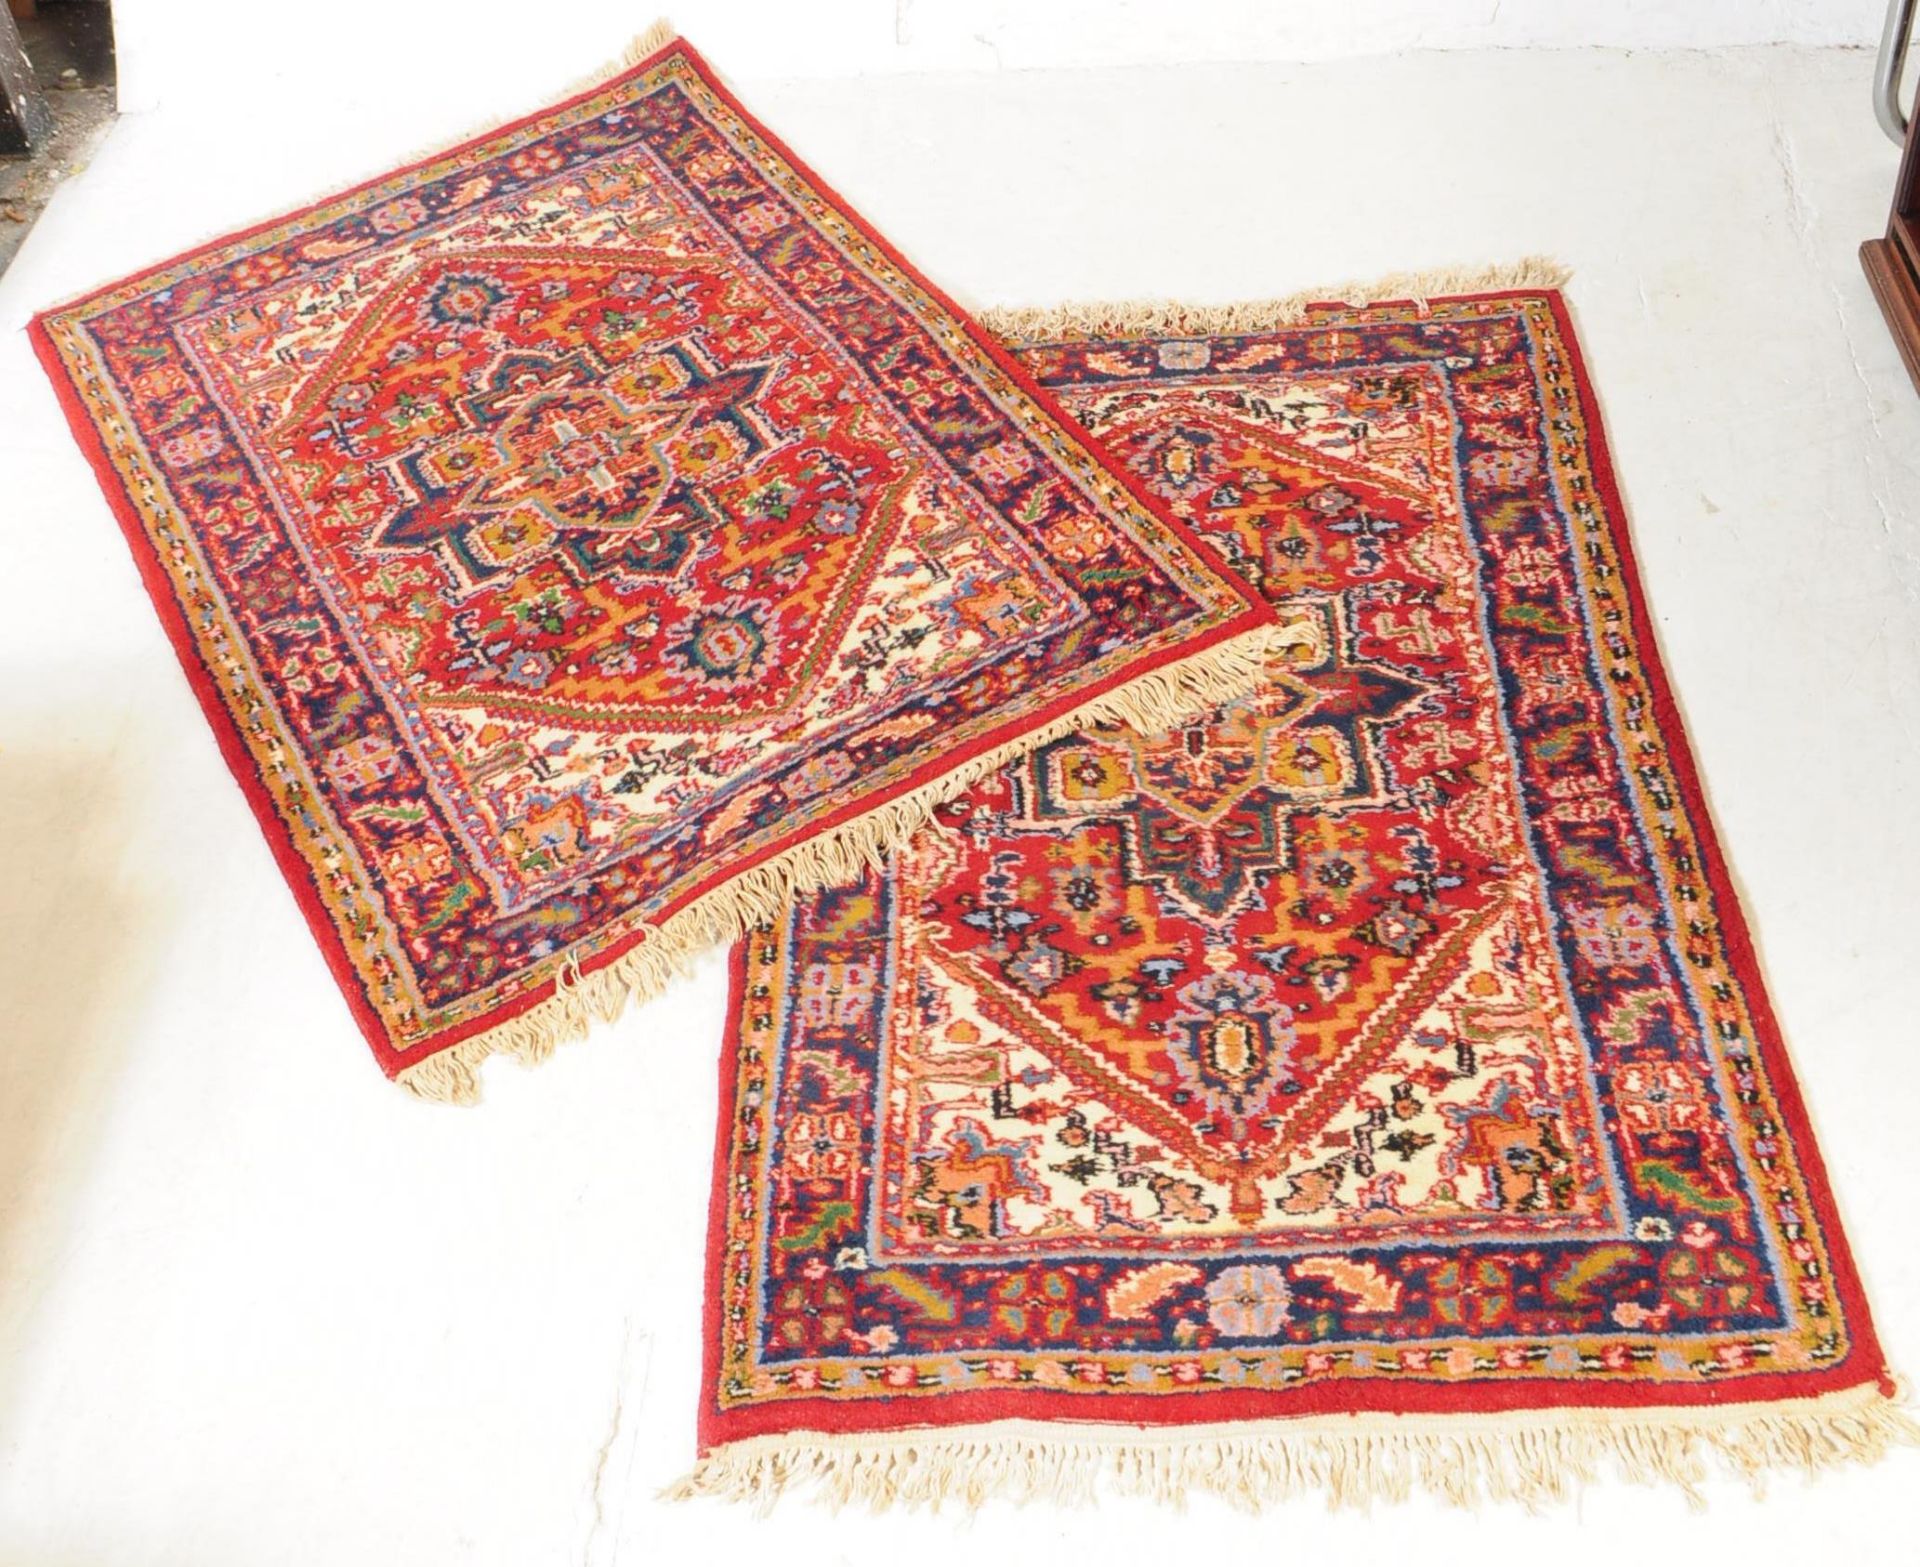 TWO LATE 20TH CENTURY PERSIAN MANNER WOOL RUGS